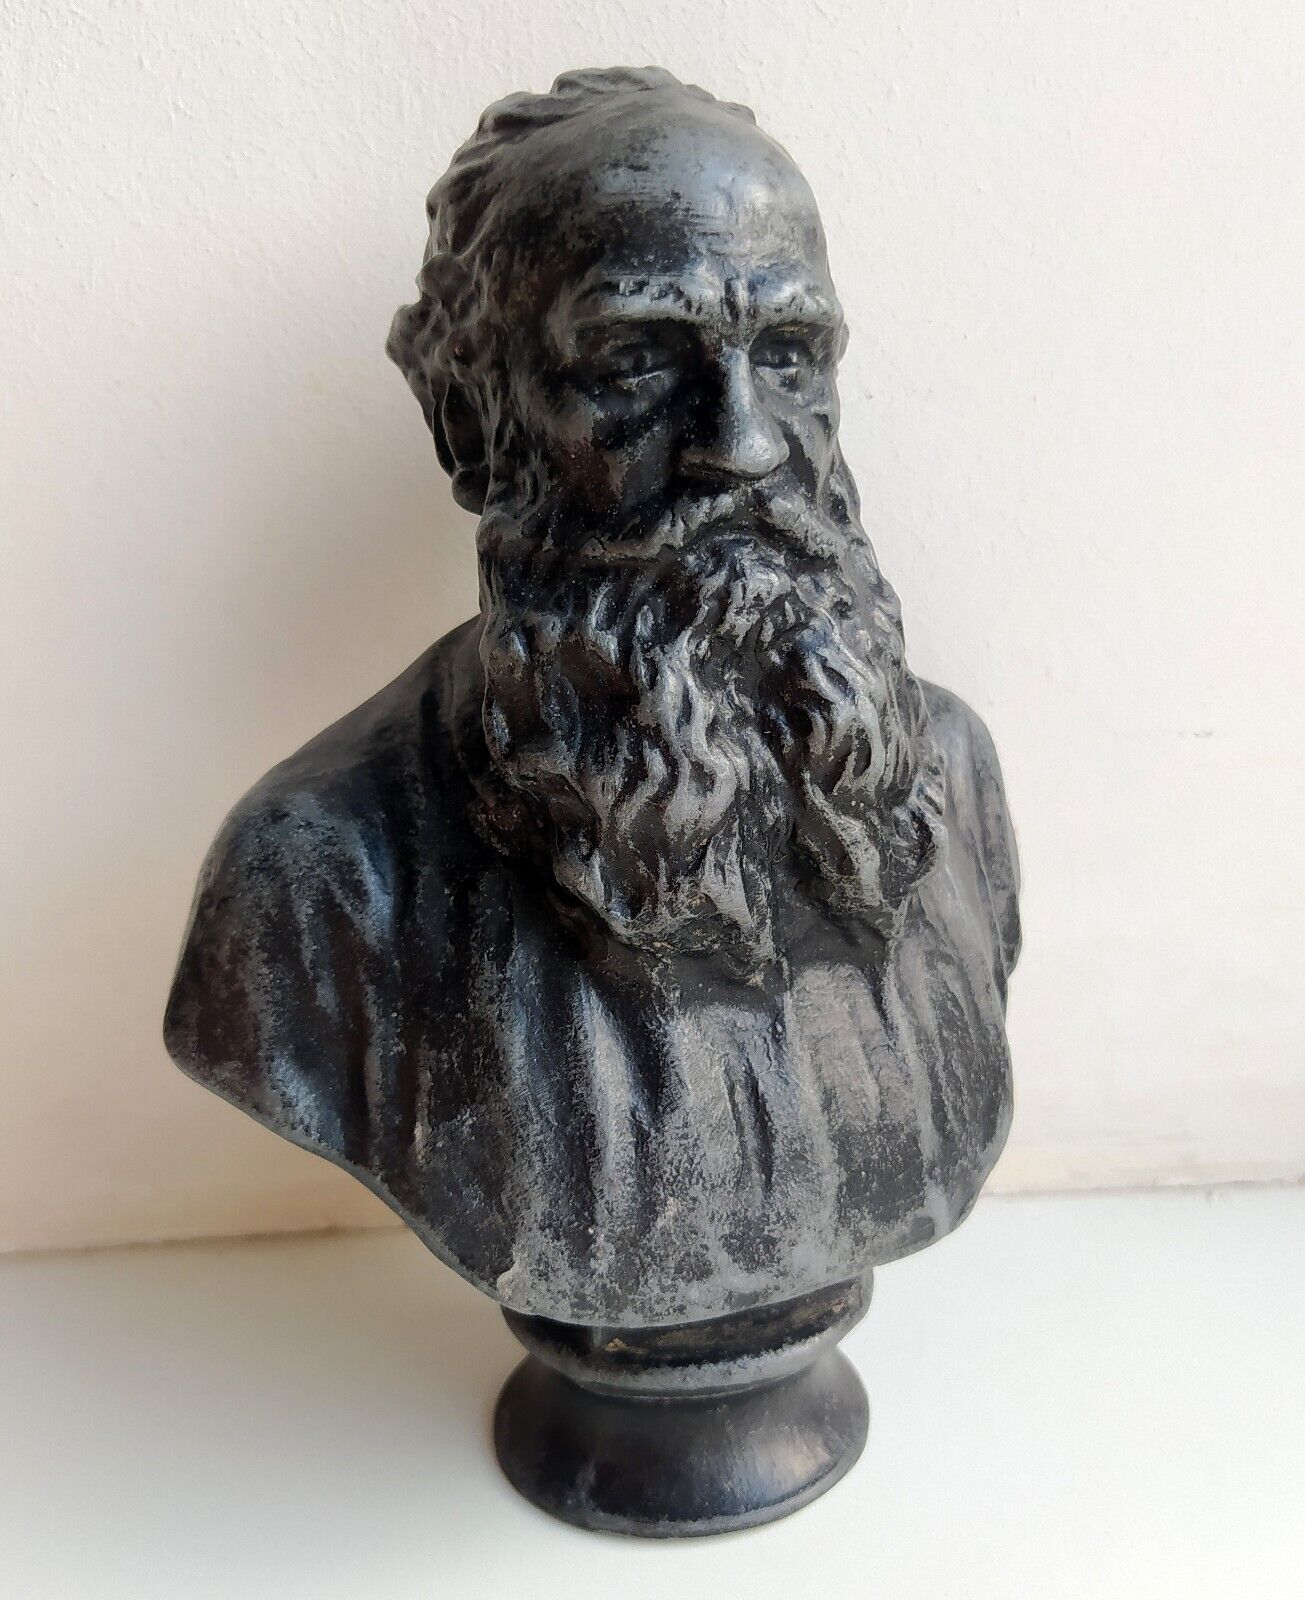 LEO TOLSTOY Old Bust Russian Writer statue bust USSR russian metal figurine